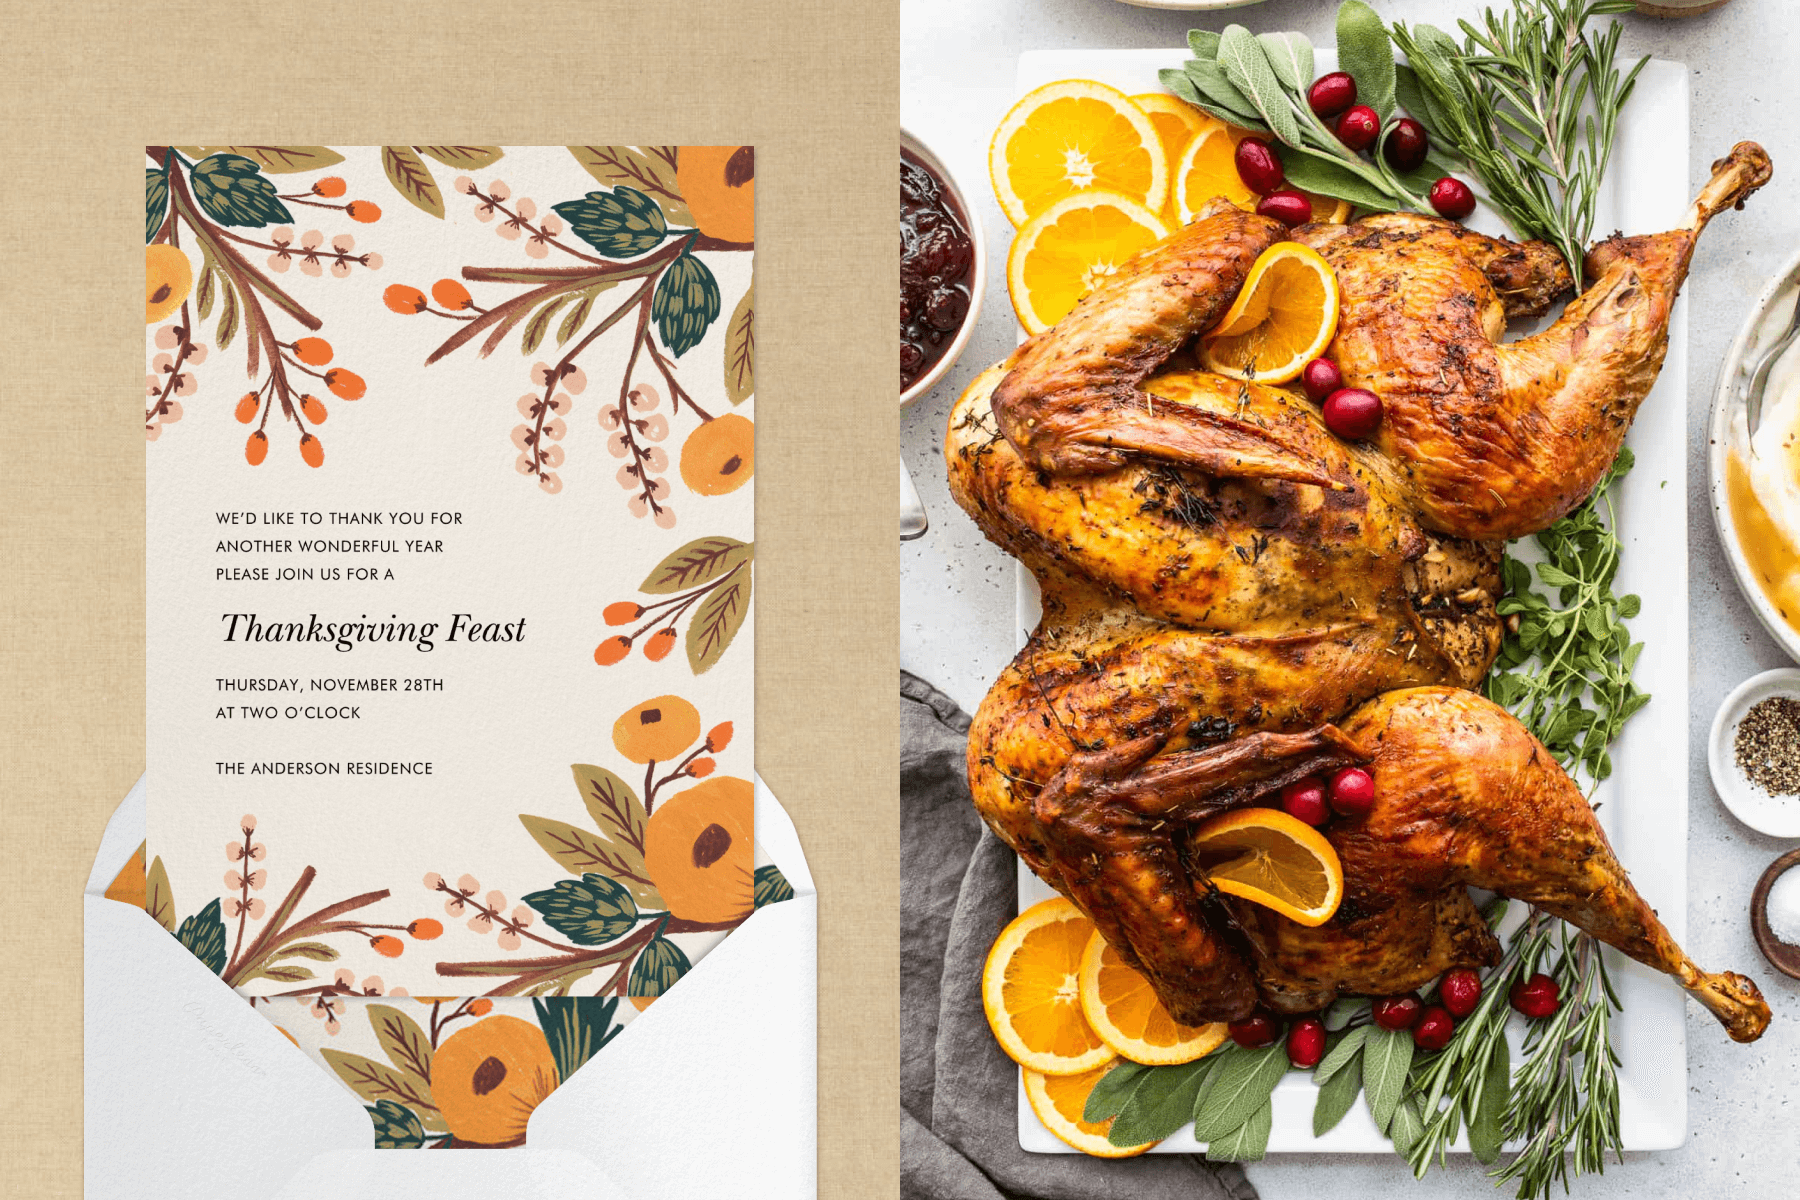 Left: A Thanksgiving Feast invitation with a simplified illustrated border of round orange flowers, autumn berries on brown branches, and dark green leaves. Right: A spatchcock turkey on a white serving tray with orange slices, cranberries, and herbs.